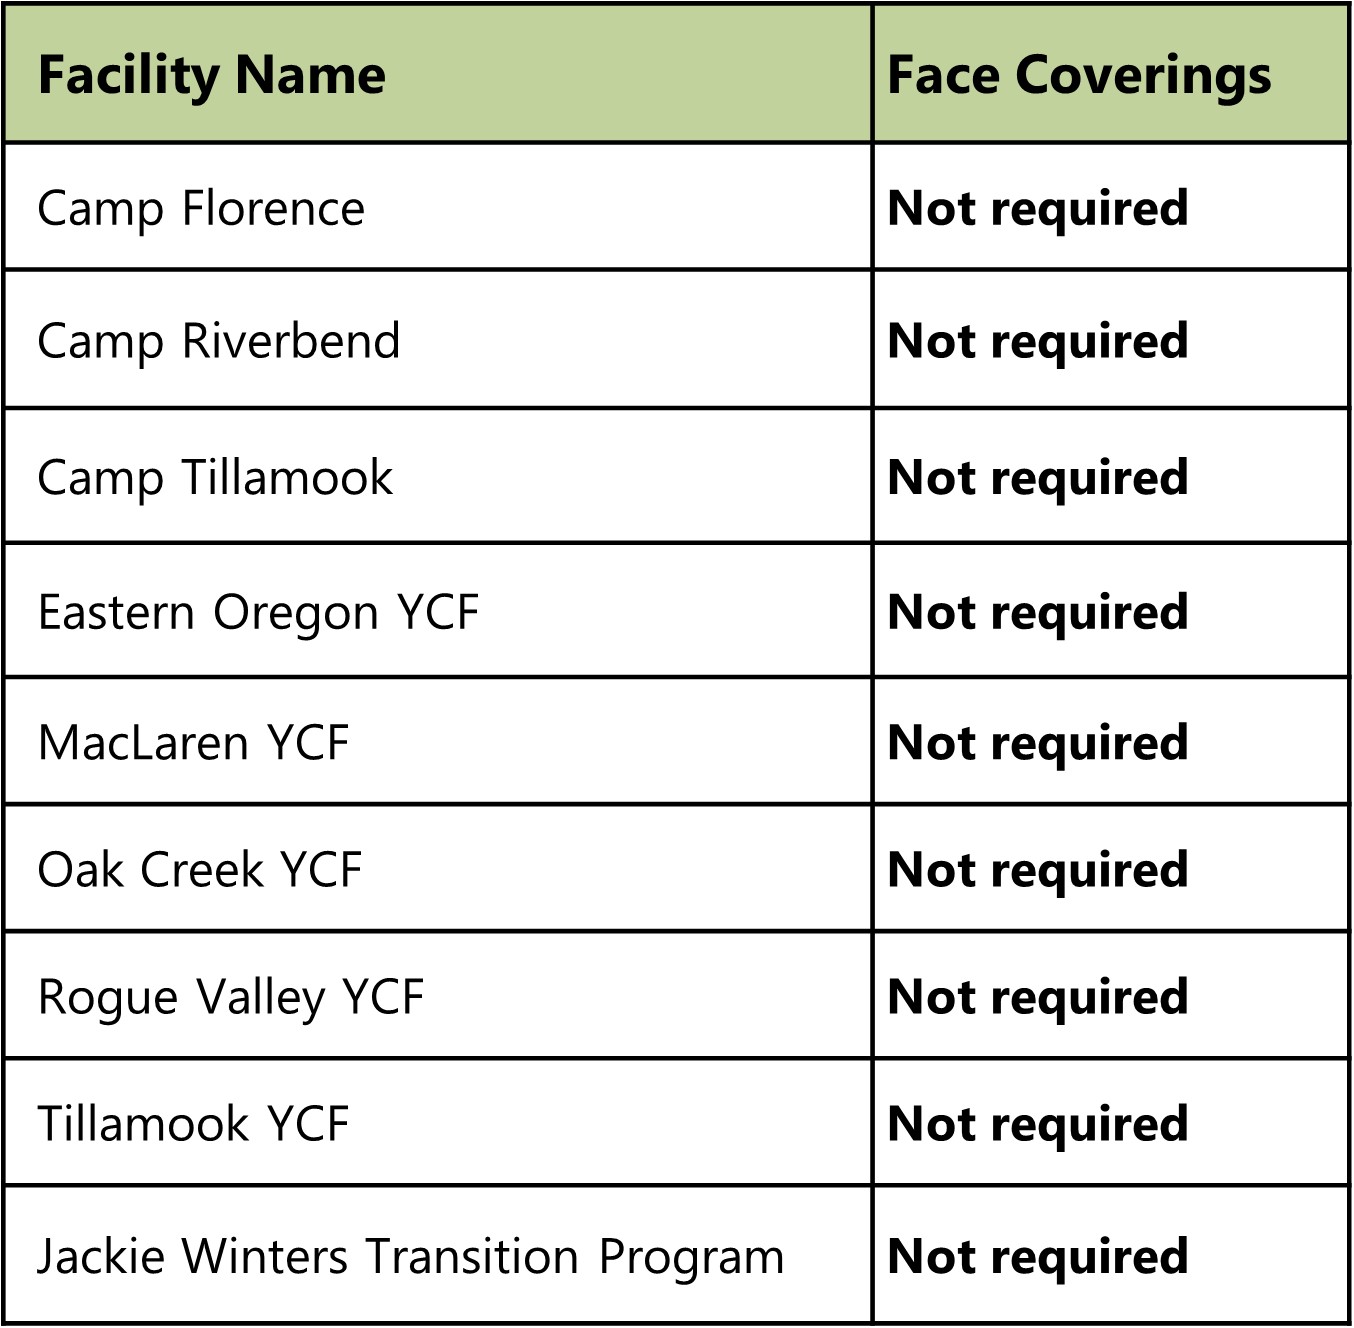 Chart showing that face coverings are only required at Tillamook YCF